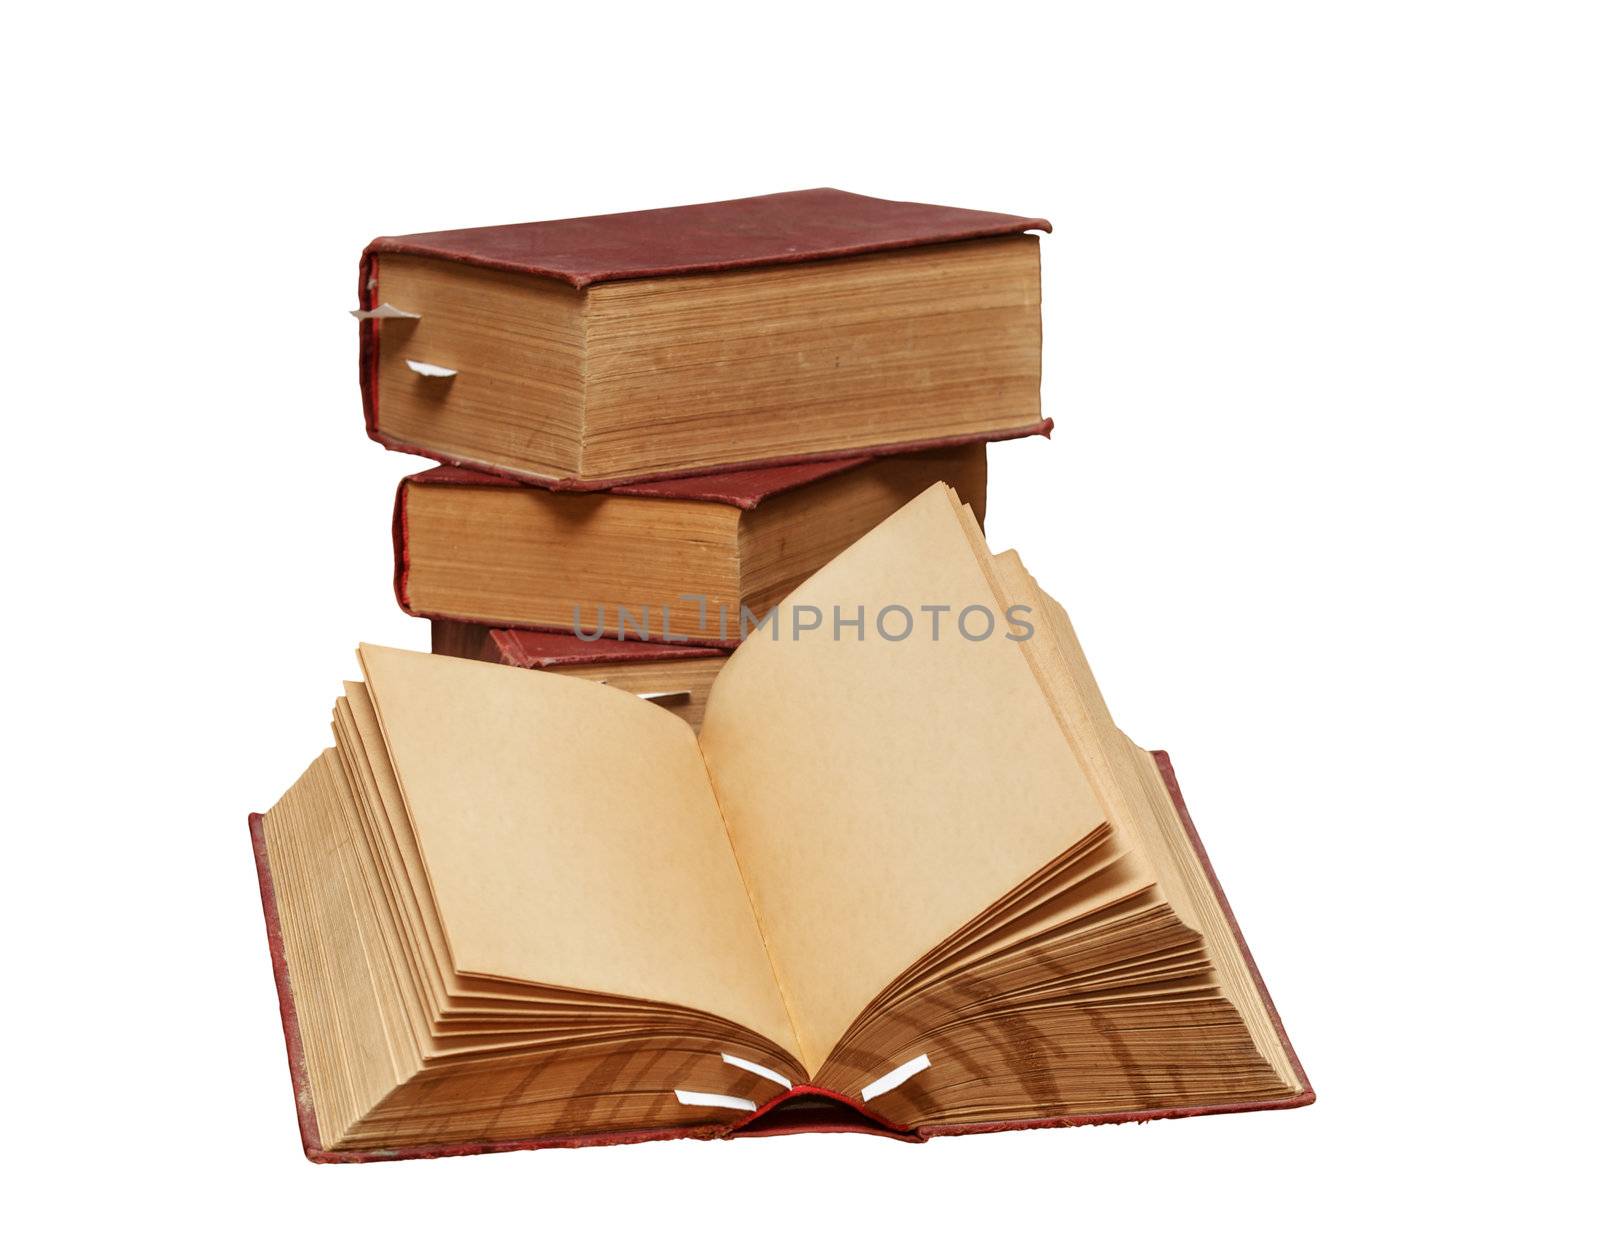  A stack of old books on a white background. One book is open, clean pages, you can add text or picture.